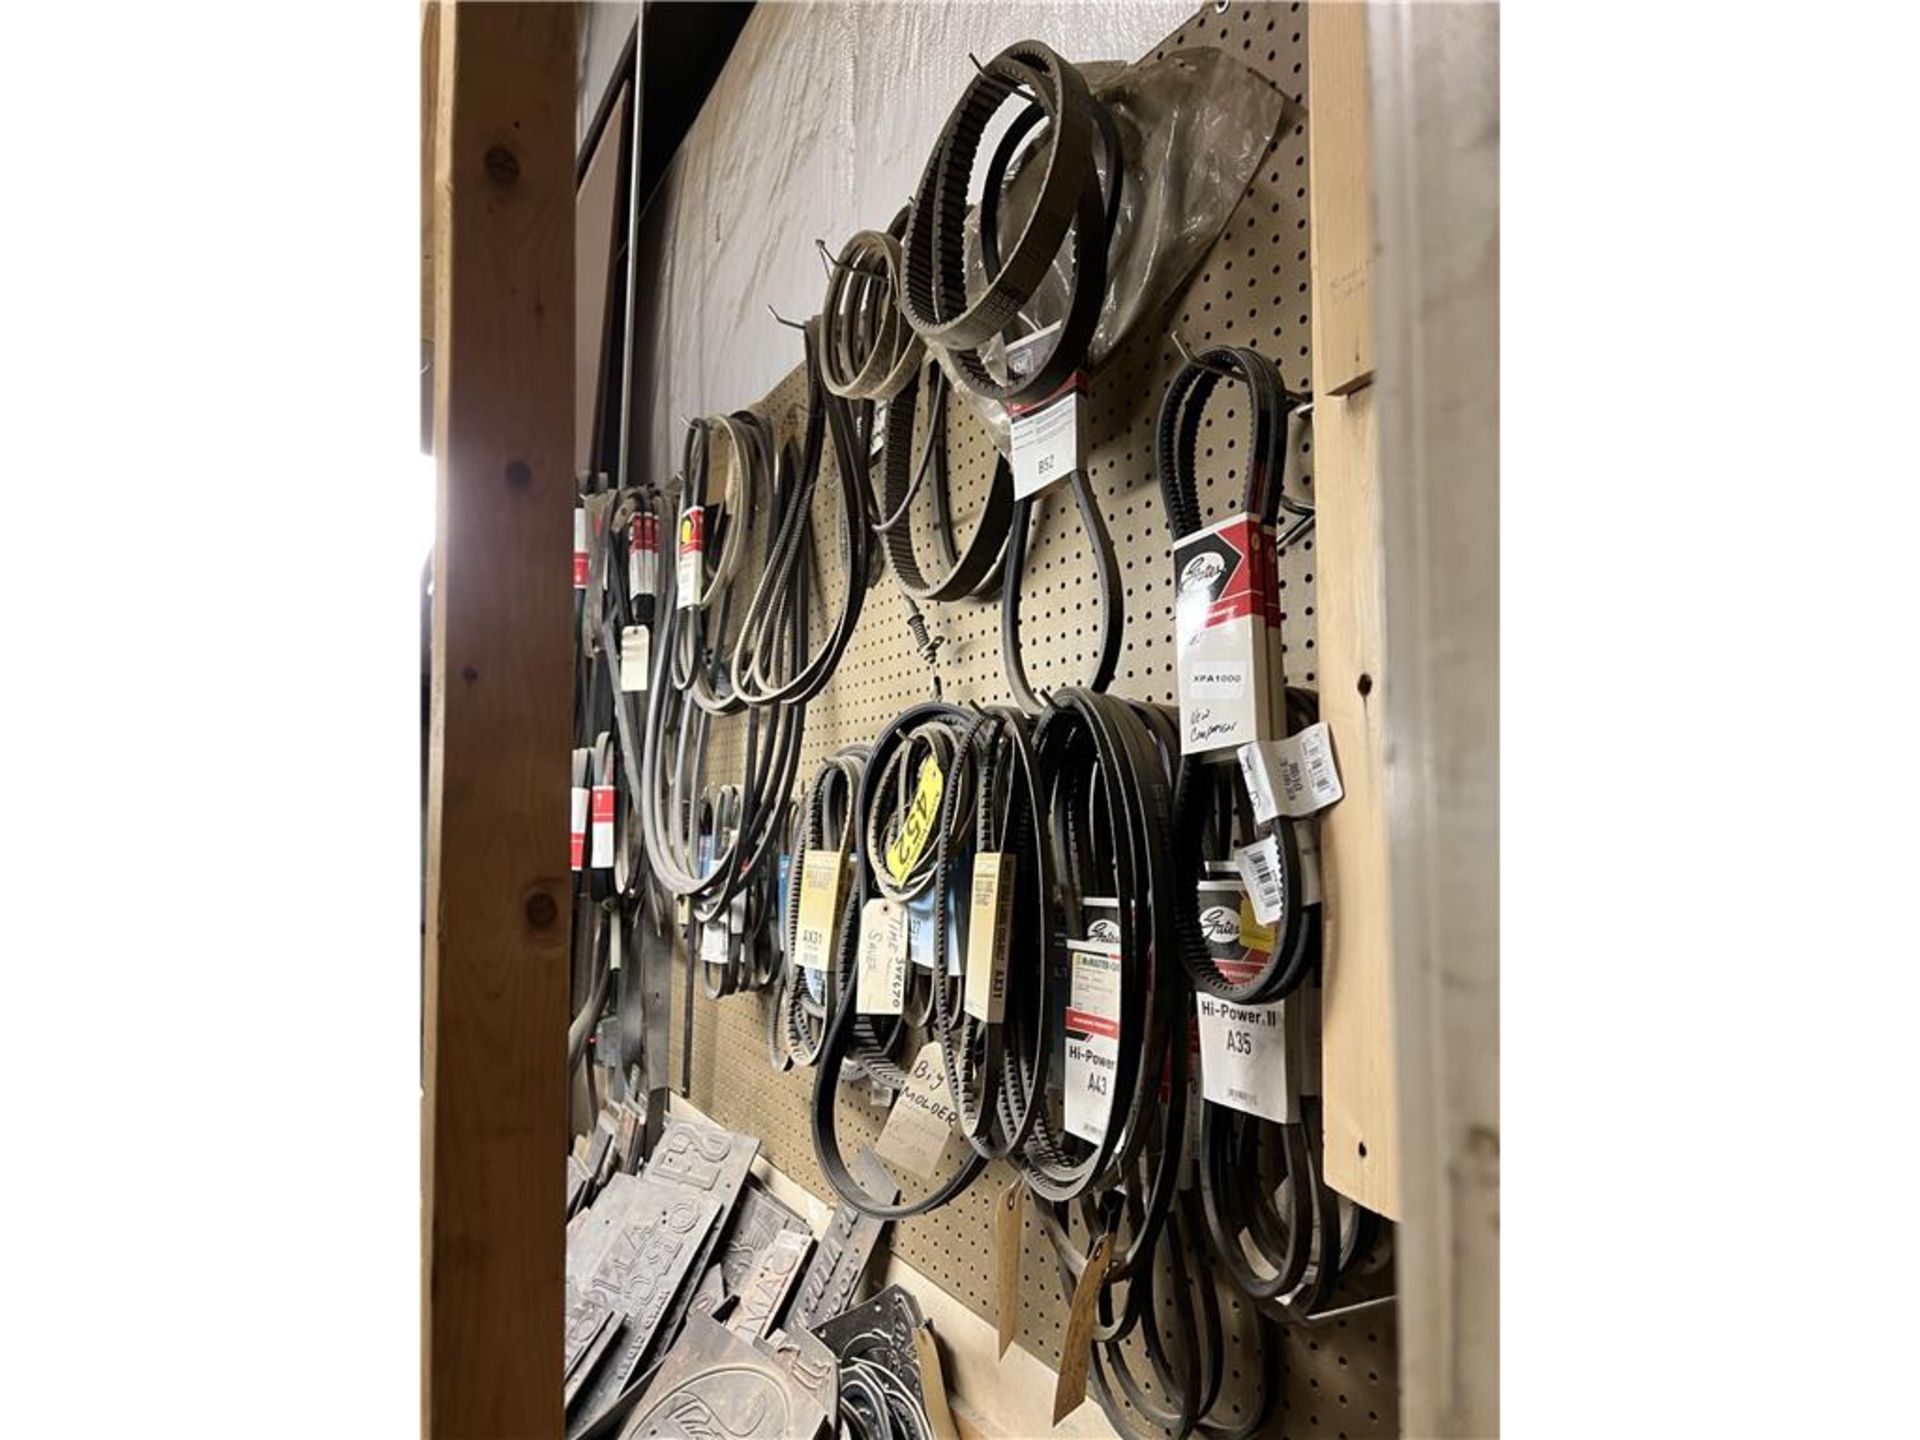 BELT INVENTORY ON WALL, APPROX. 90